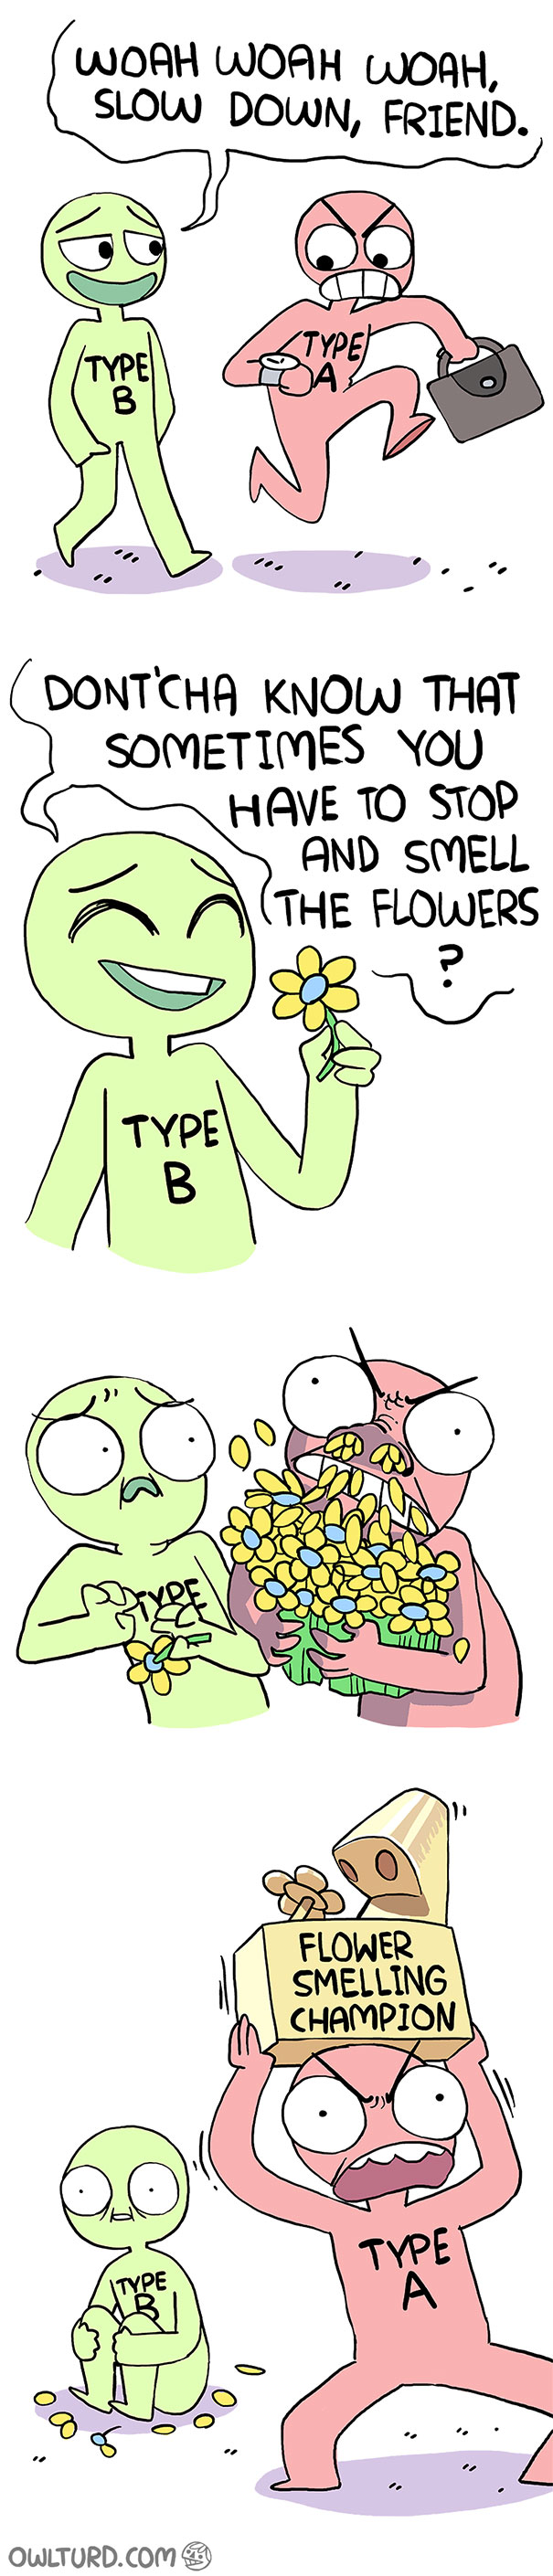 A And B Smell The Flowers